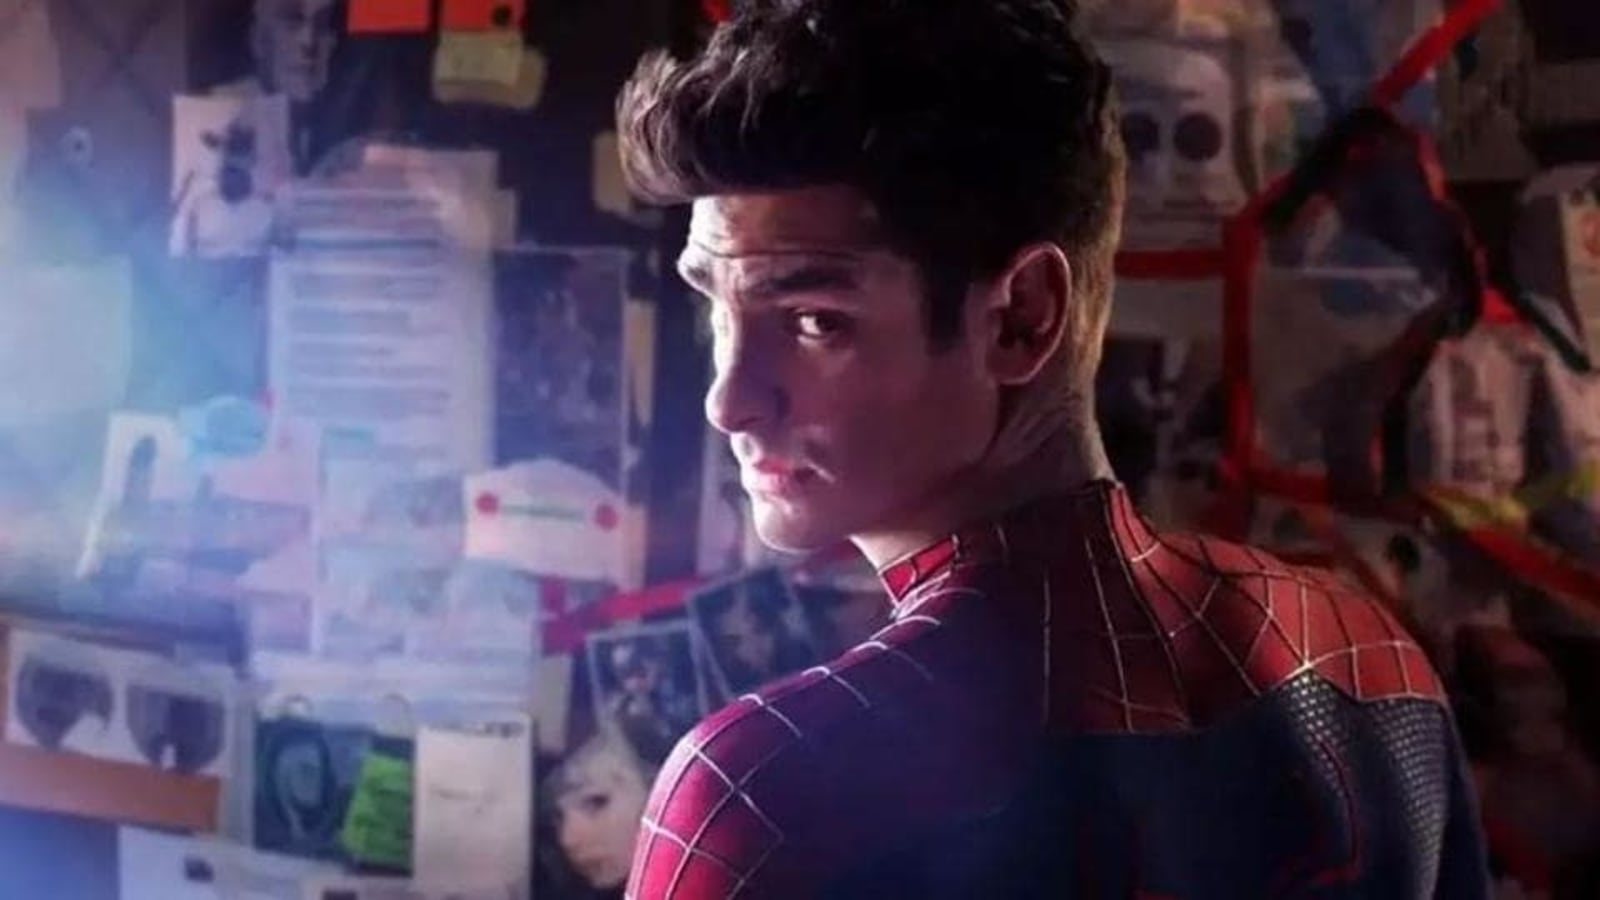 Andrew Garfield as Spider-Man in "The Amazing Spider-Man"